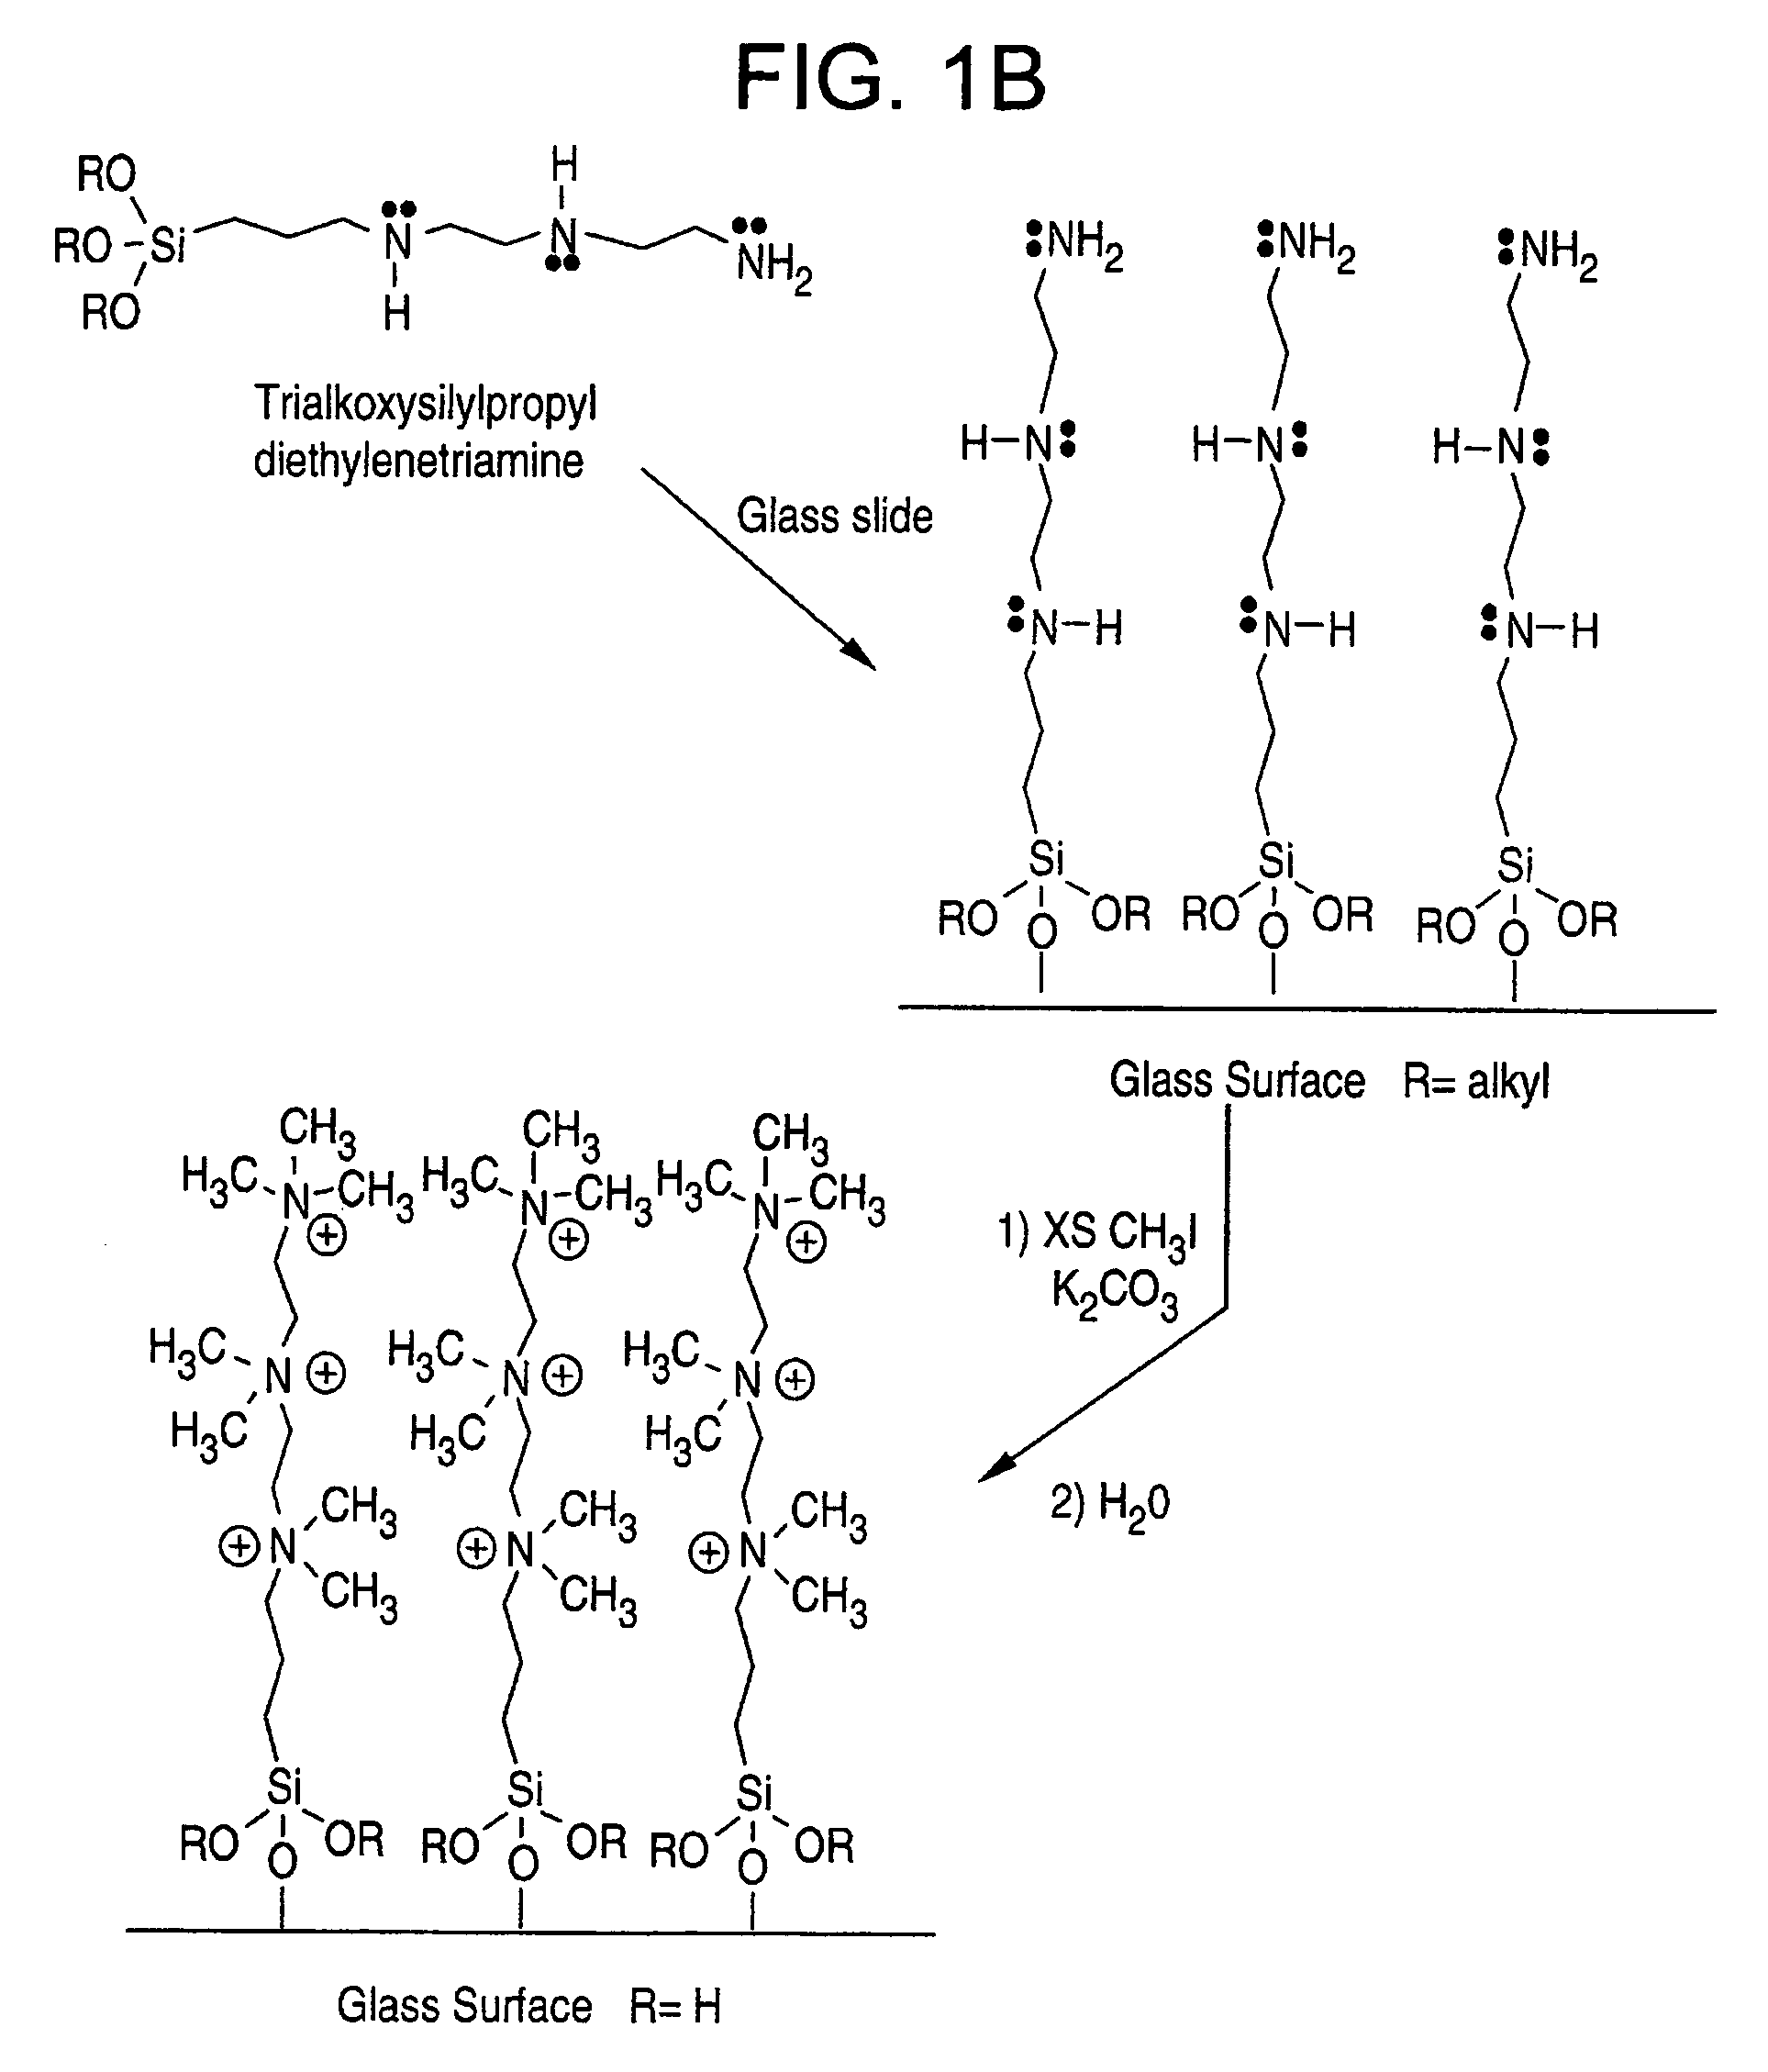 Biomolecule retaining material and methods for attaching biomolecules to a surface